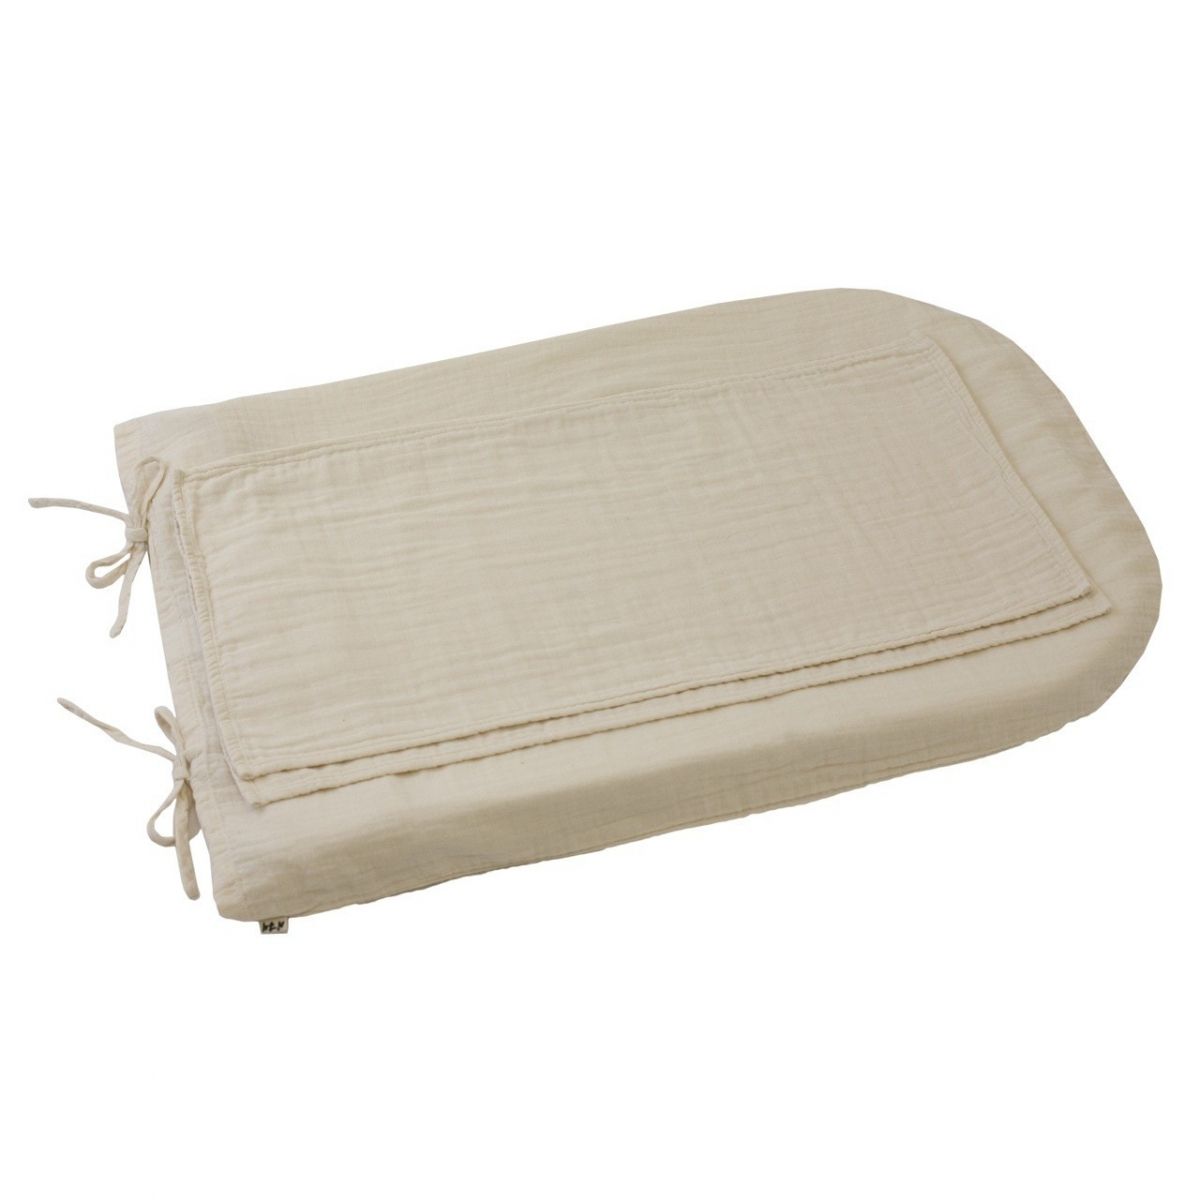 Numero 74 Changing Pad cover Round natural 7400000059320 